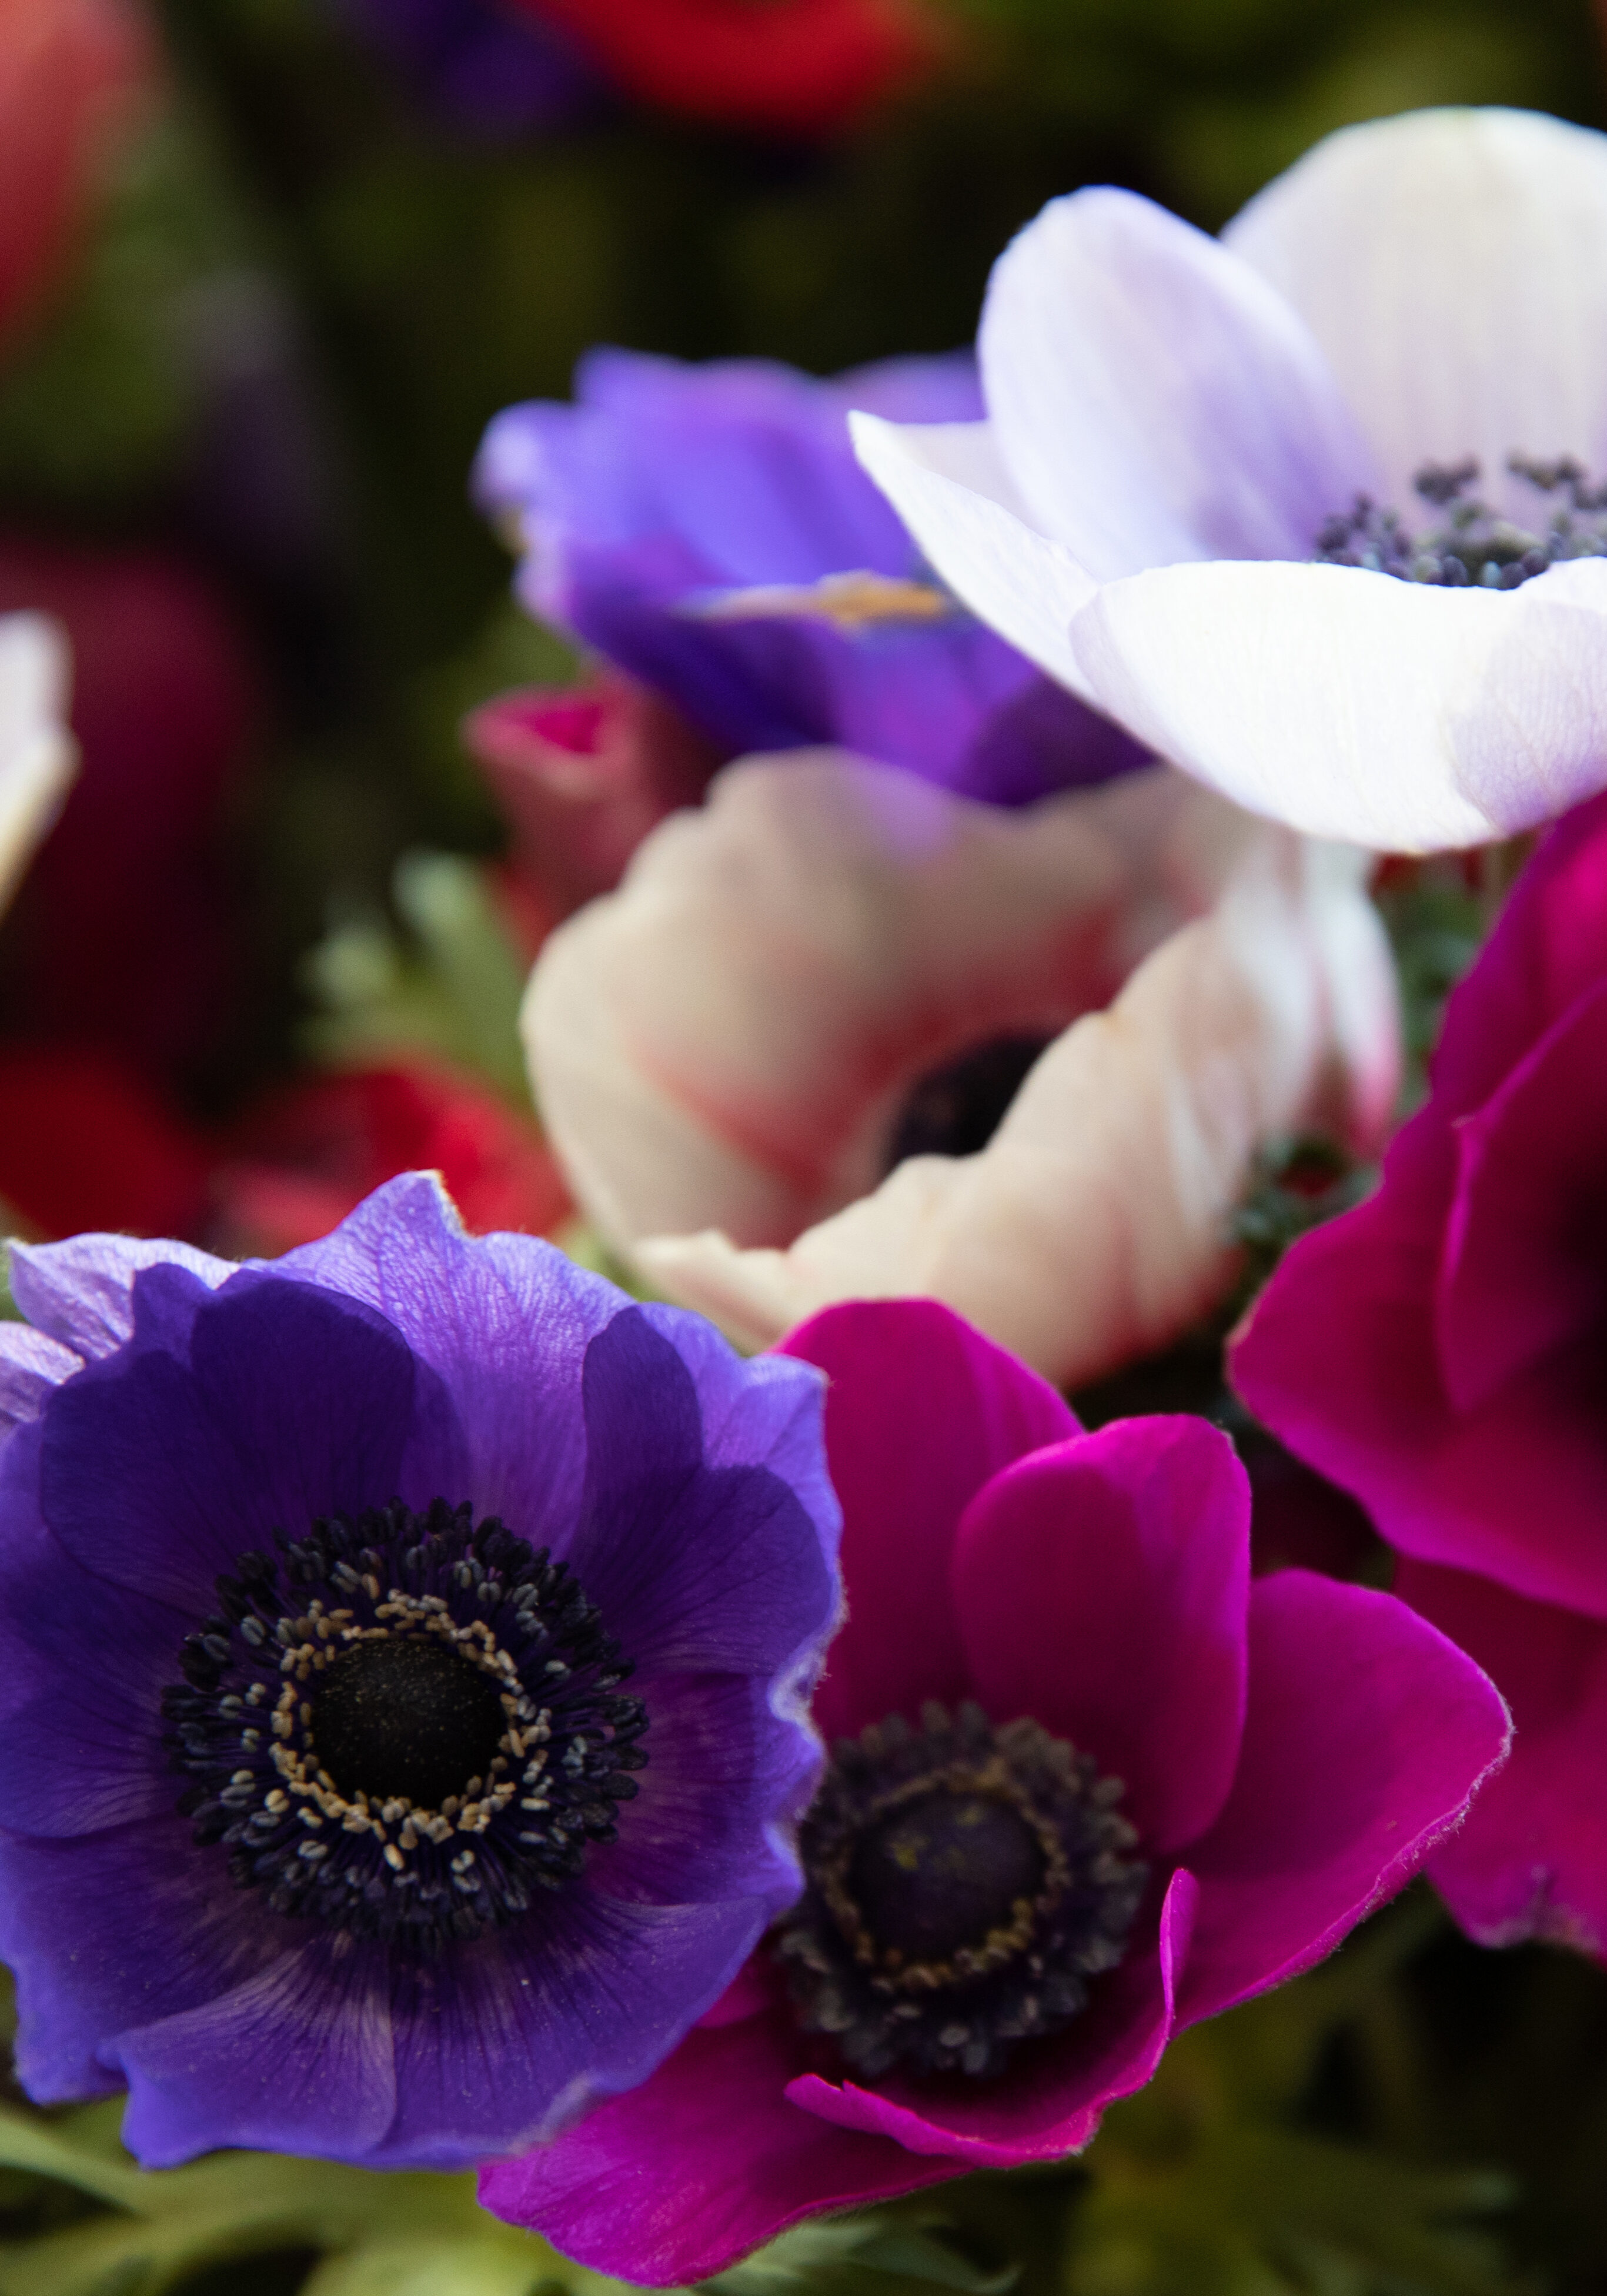 Springtime floral background of beautiful Anemone coronaria flowers in violet, blue, white colors. Horizontal. Daylight. Close-up.